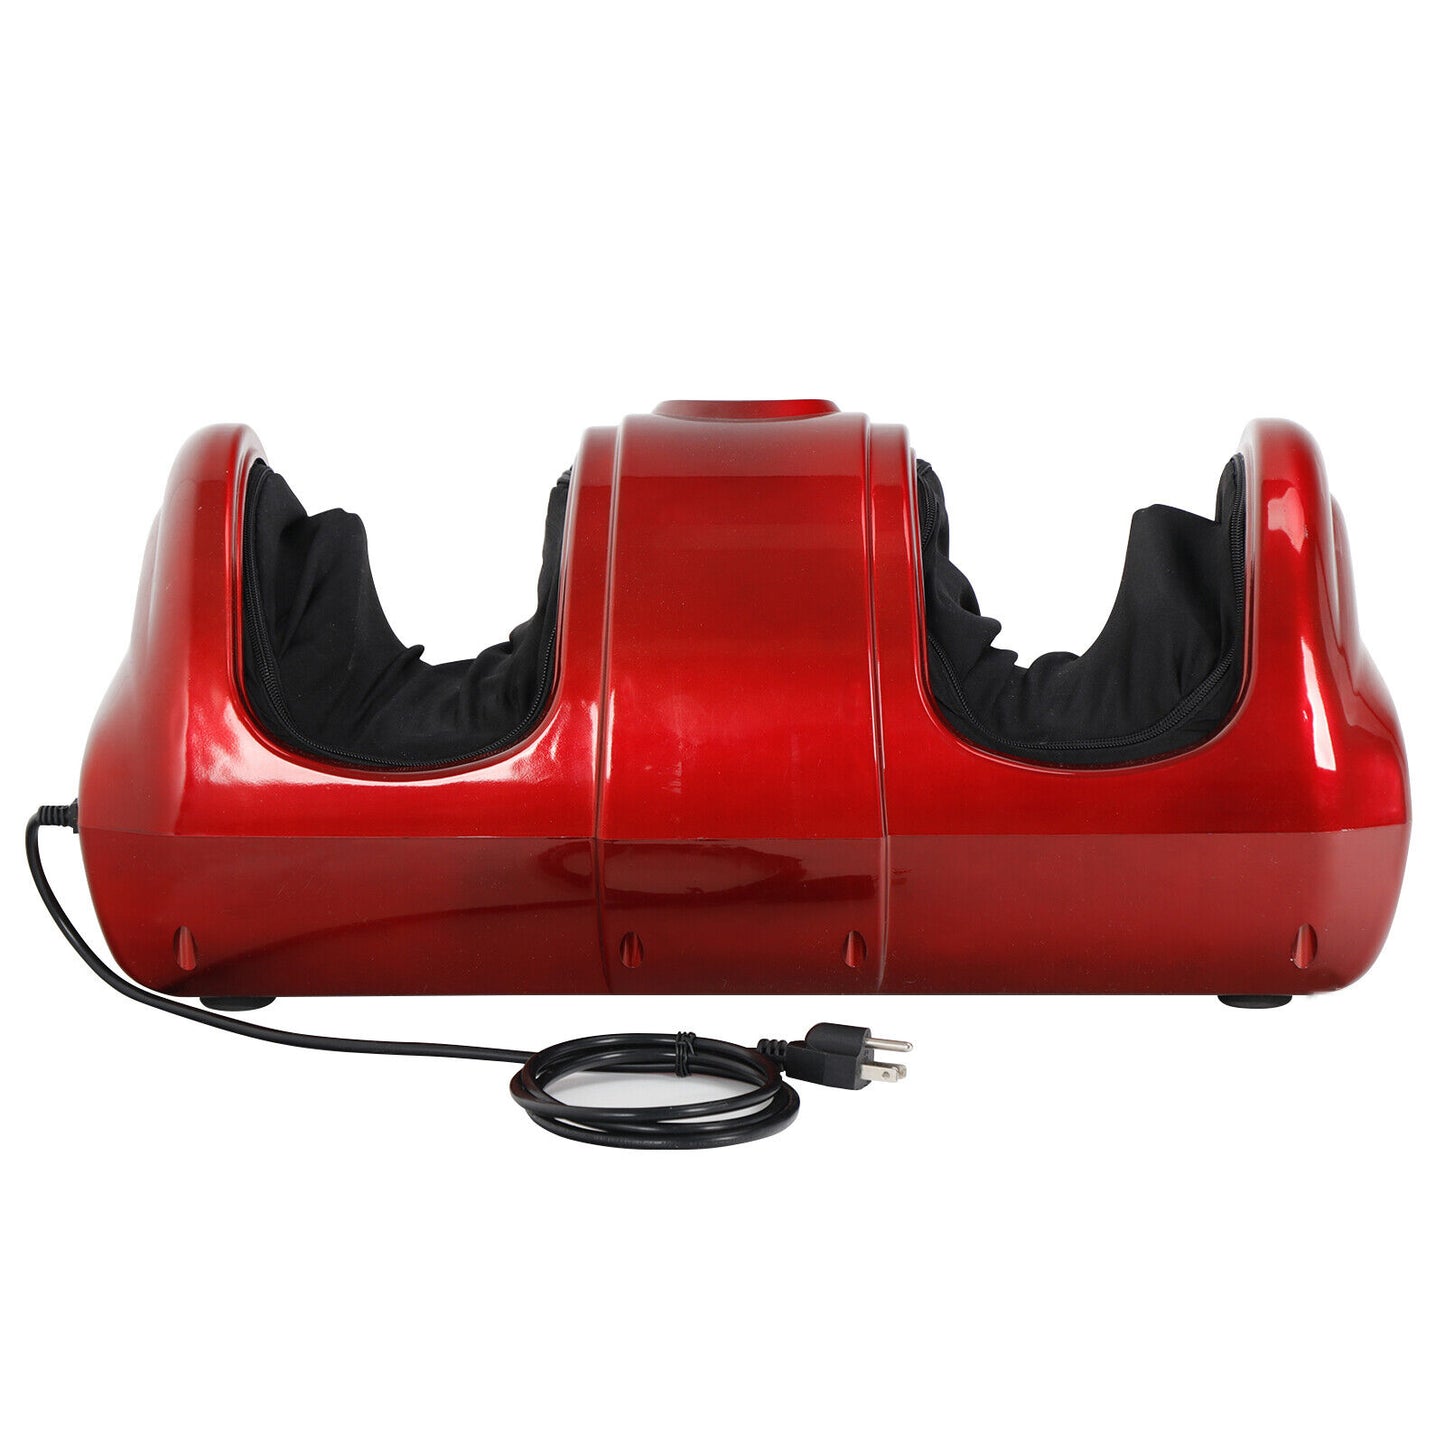 Shiatsu Red Foot Massager Kneading and Rolling Leg Calf Ankle Remote New